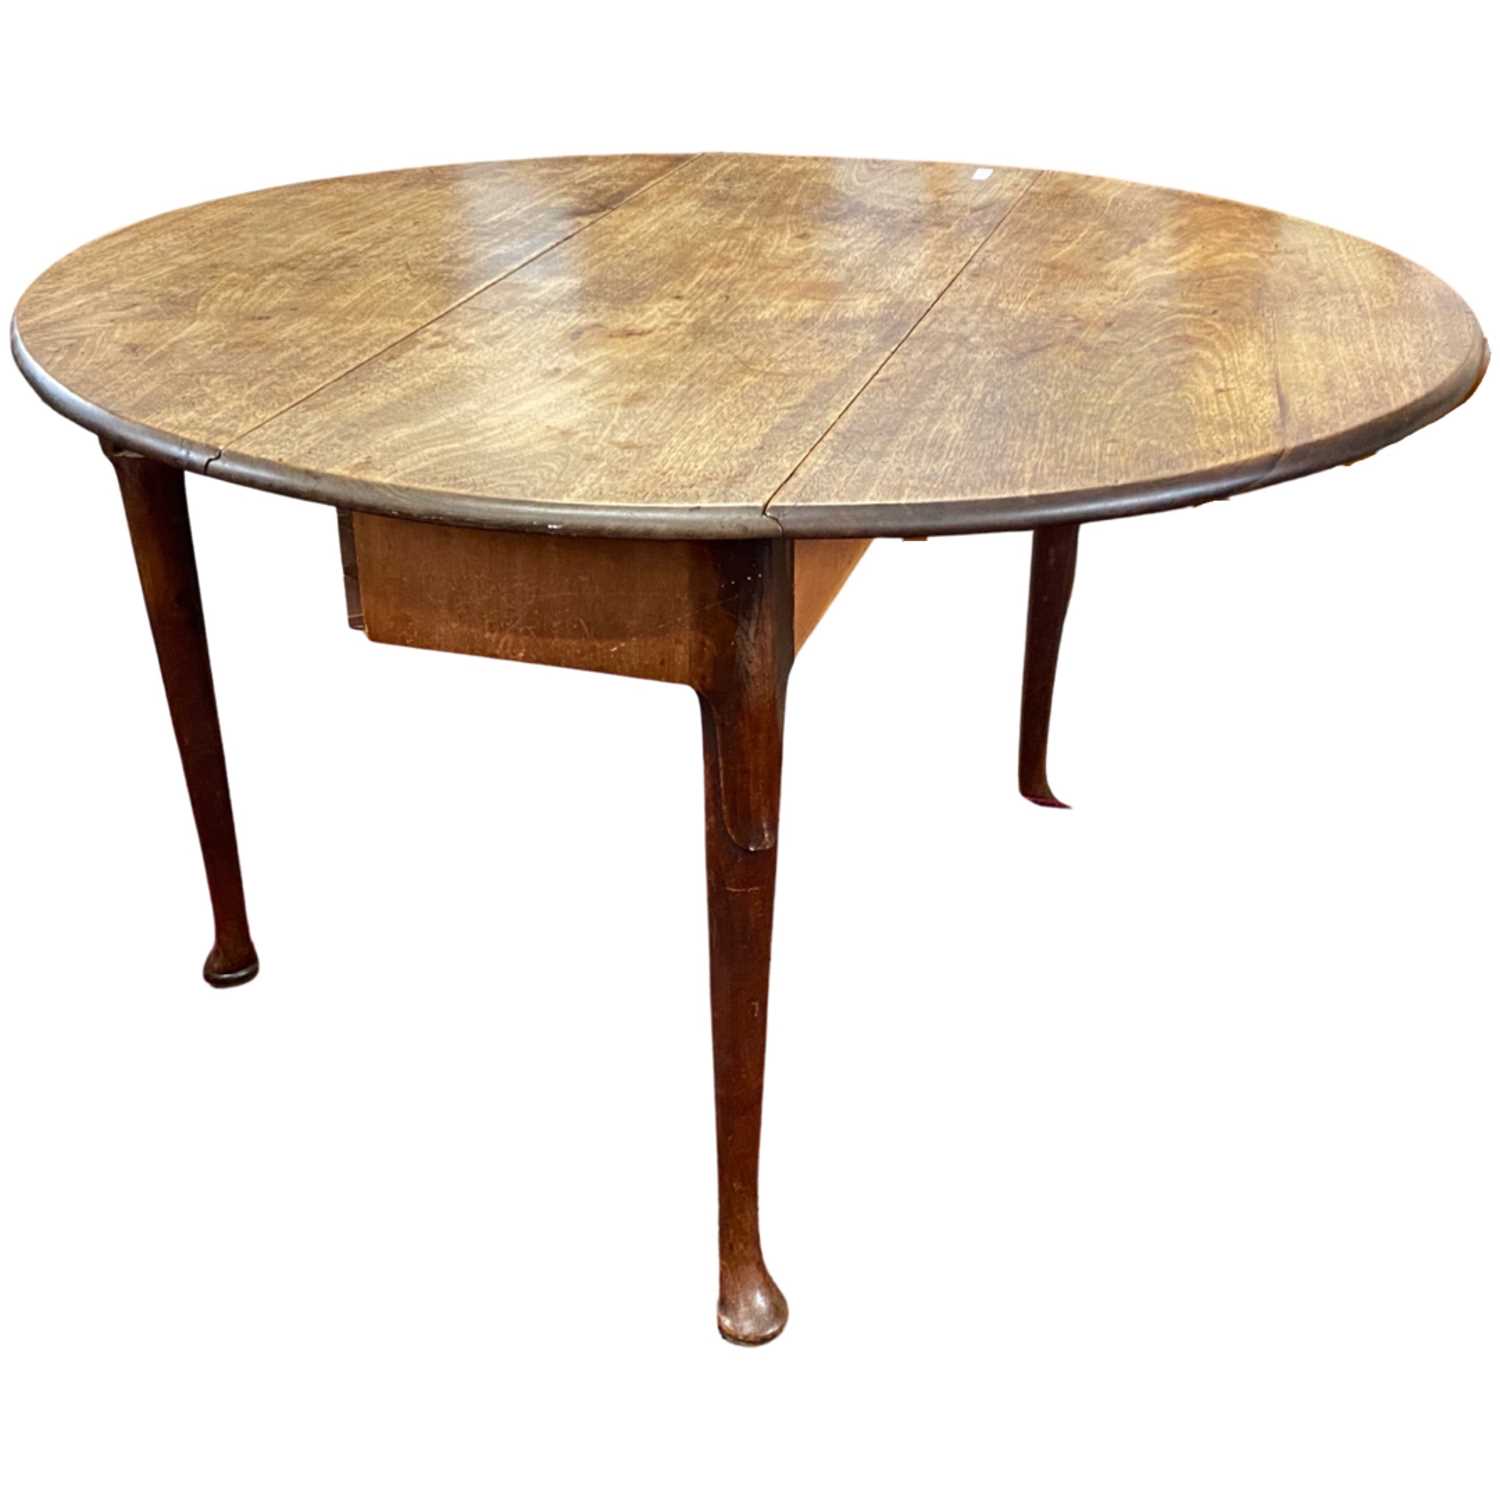 Small Georgian mahogany drop leaf table with oval top and tapering legs with pad feet, table 119cm